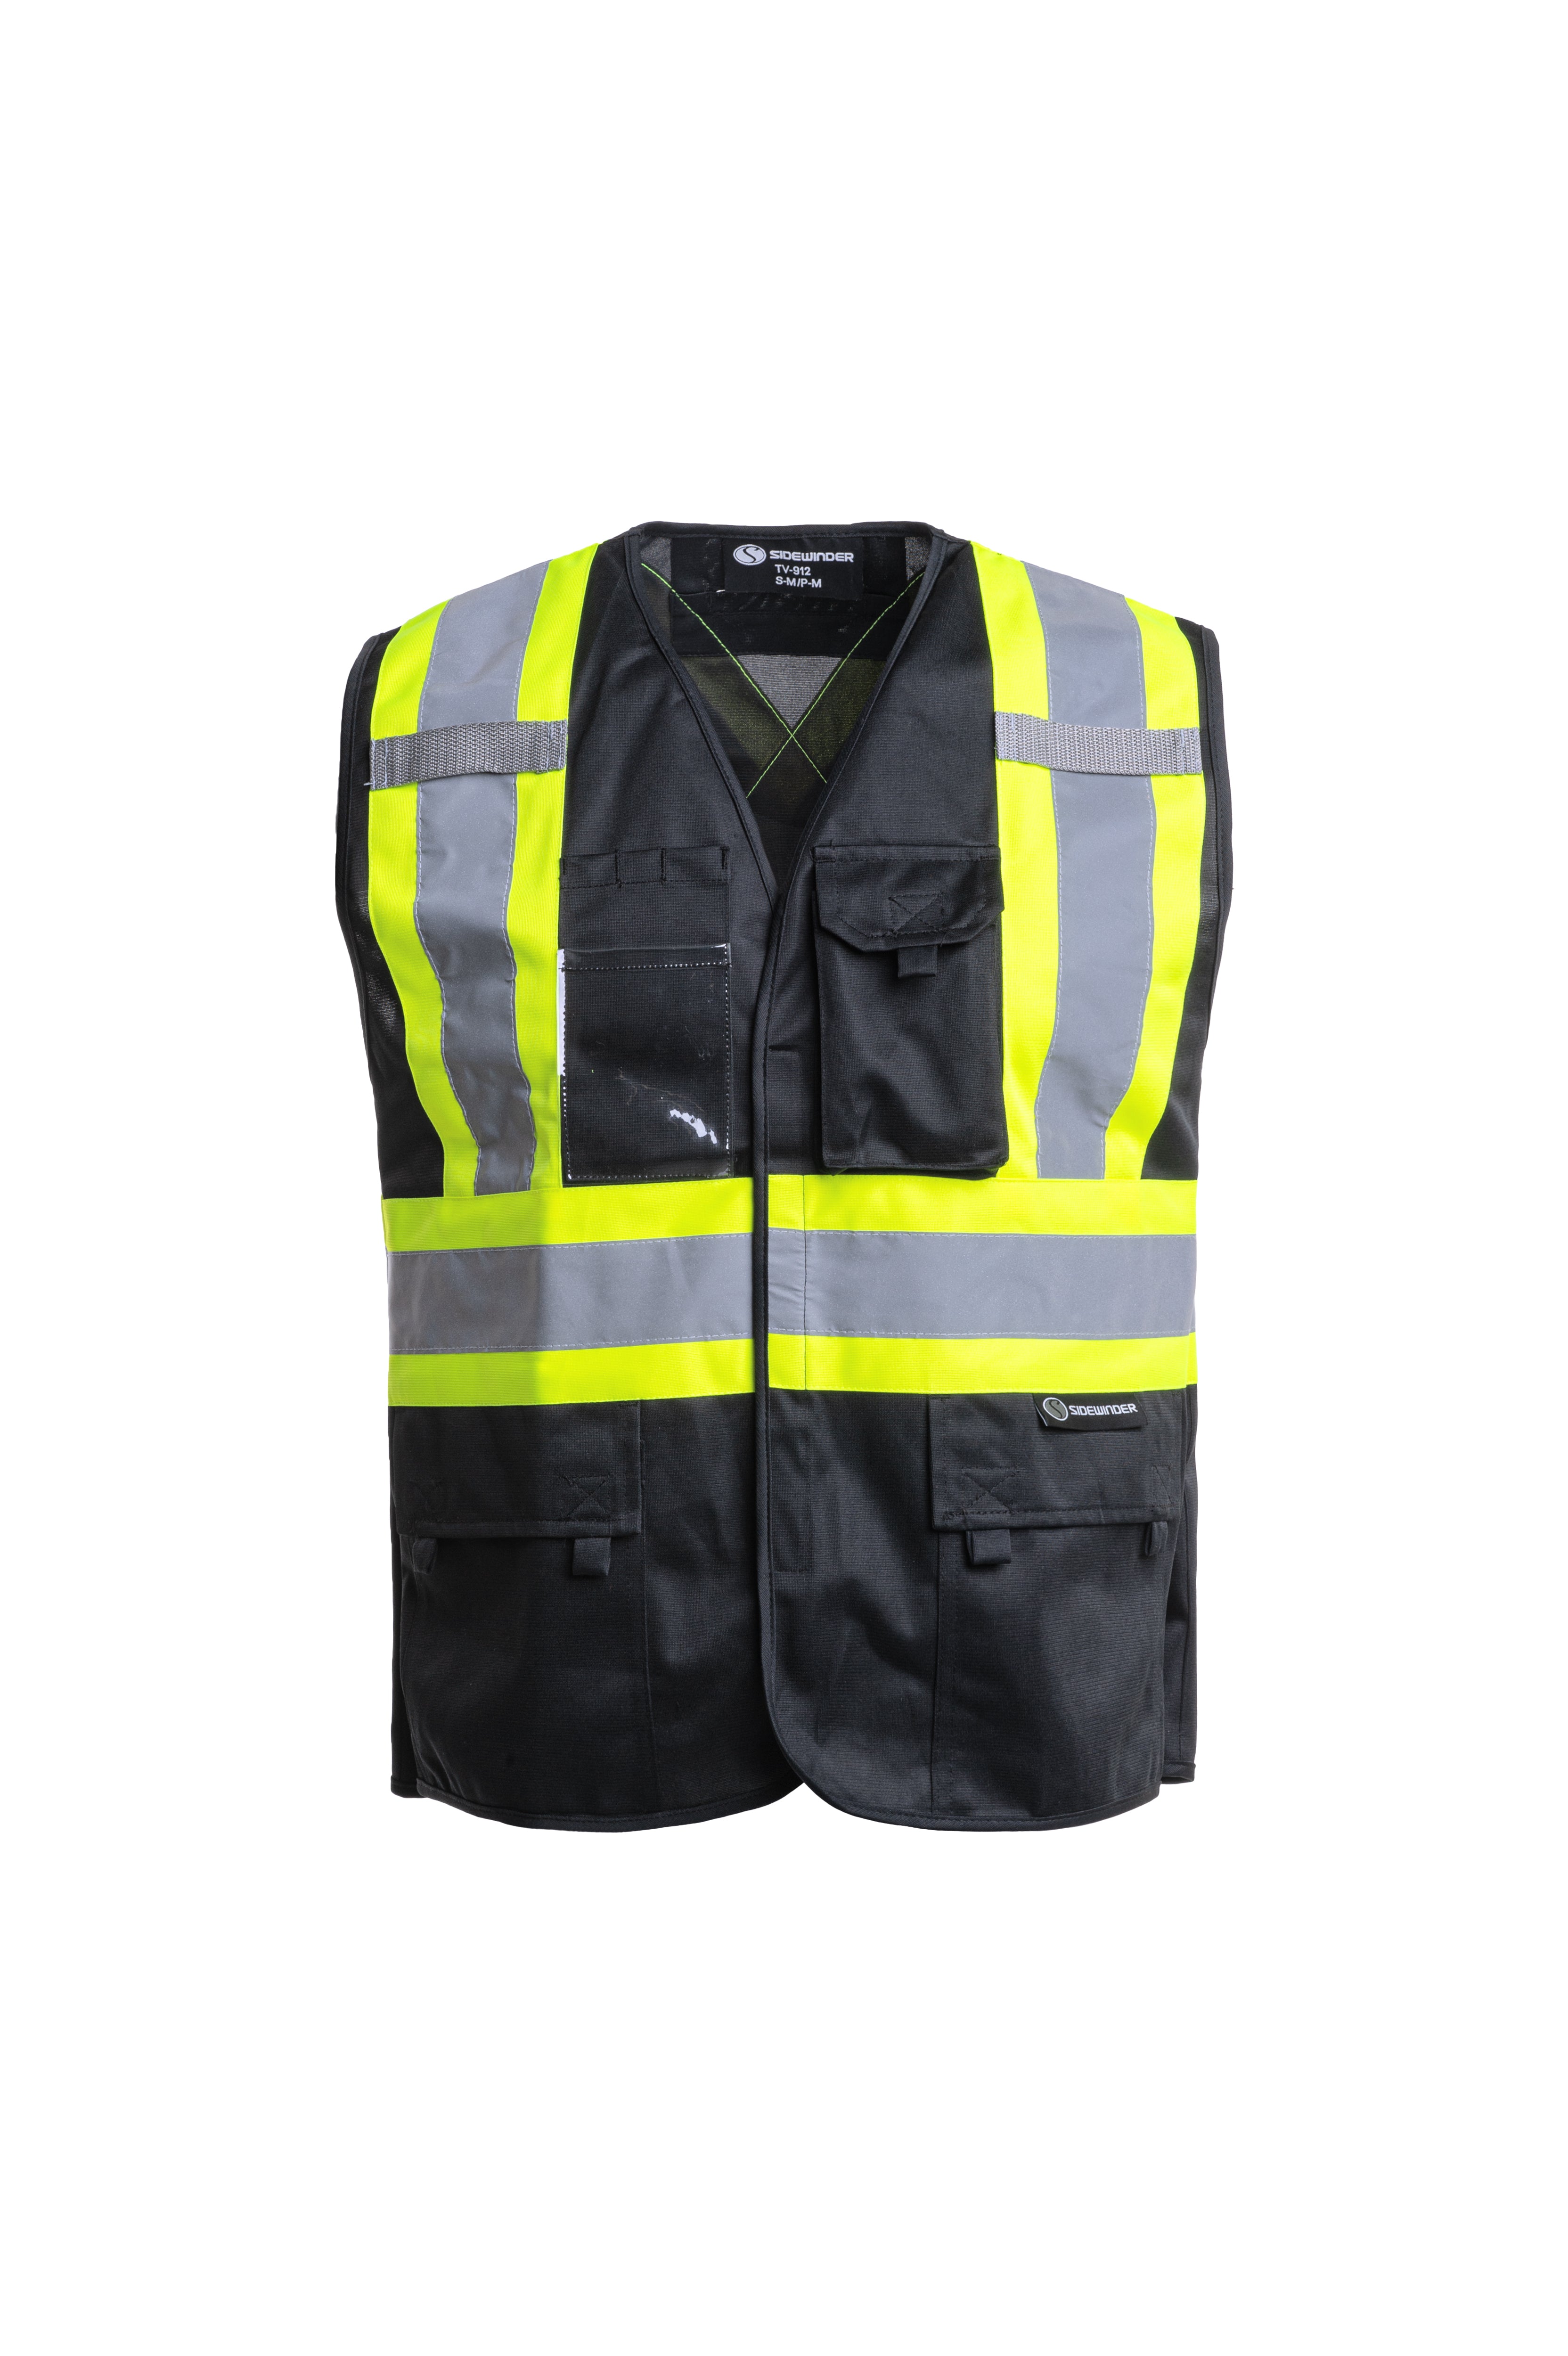 Mua 2xReflective Safety Vest Engineer Construction Gear with Pockets Yellow  S | Tiki